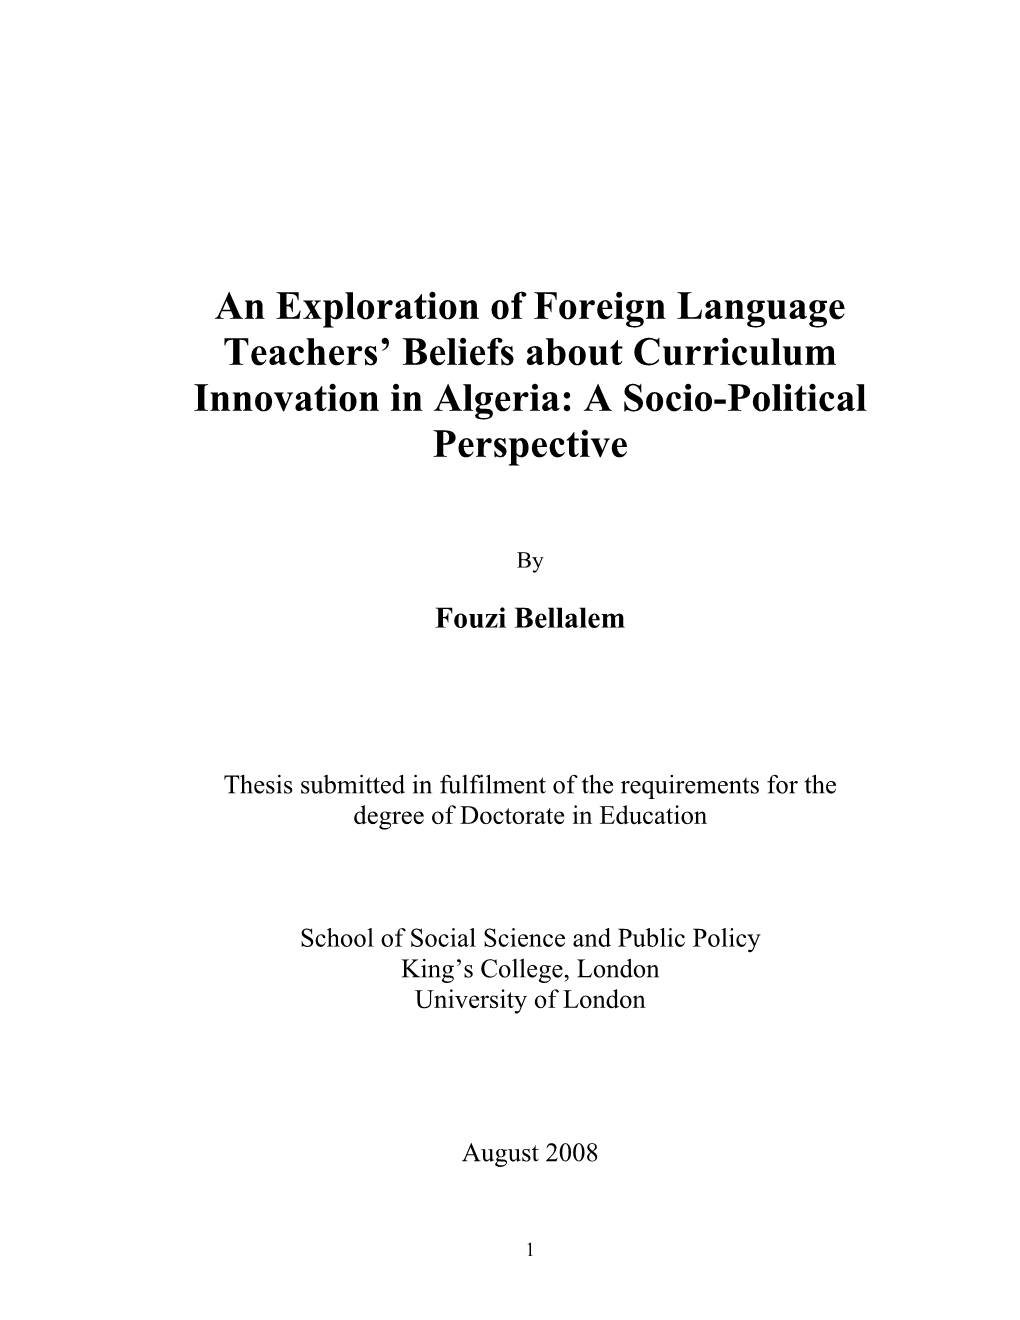 An Exploration of Foreign Language Teachers' Beliefs About Curriculum Innovation in Algeria